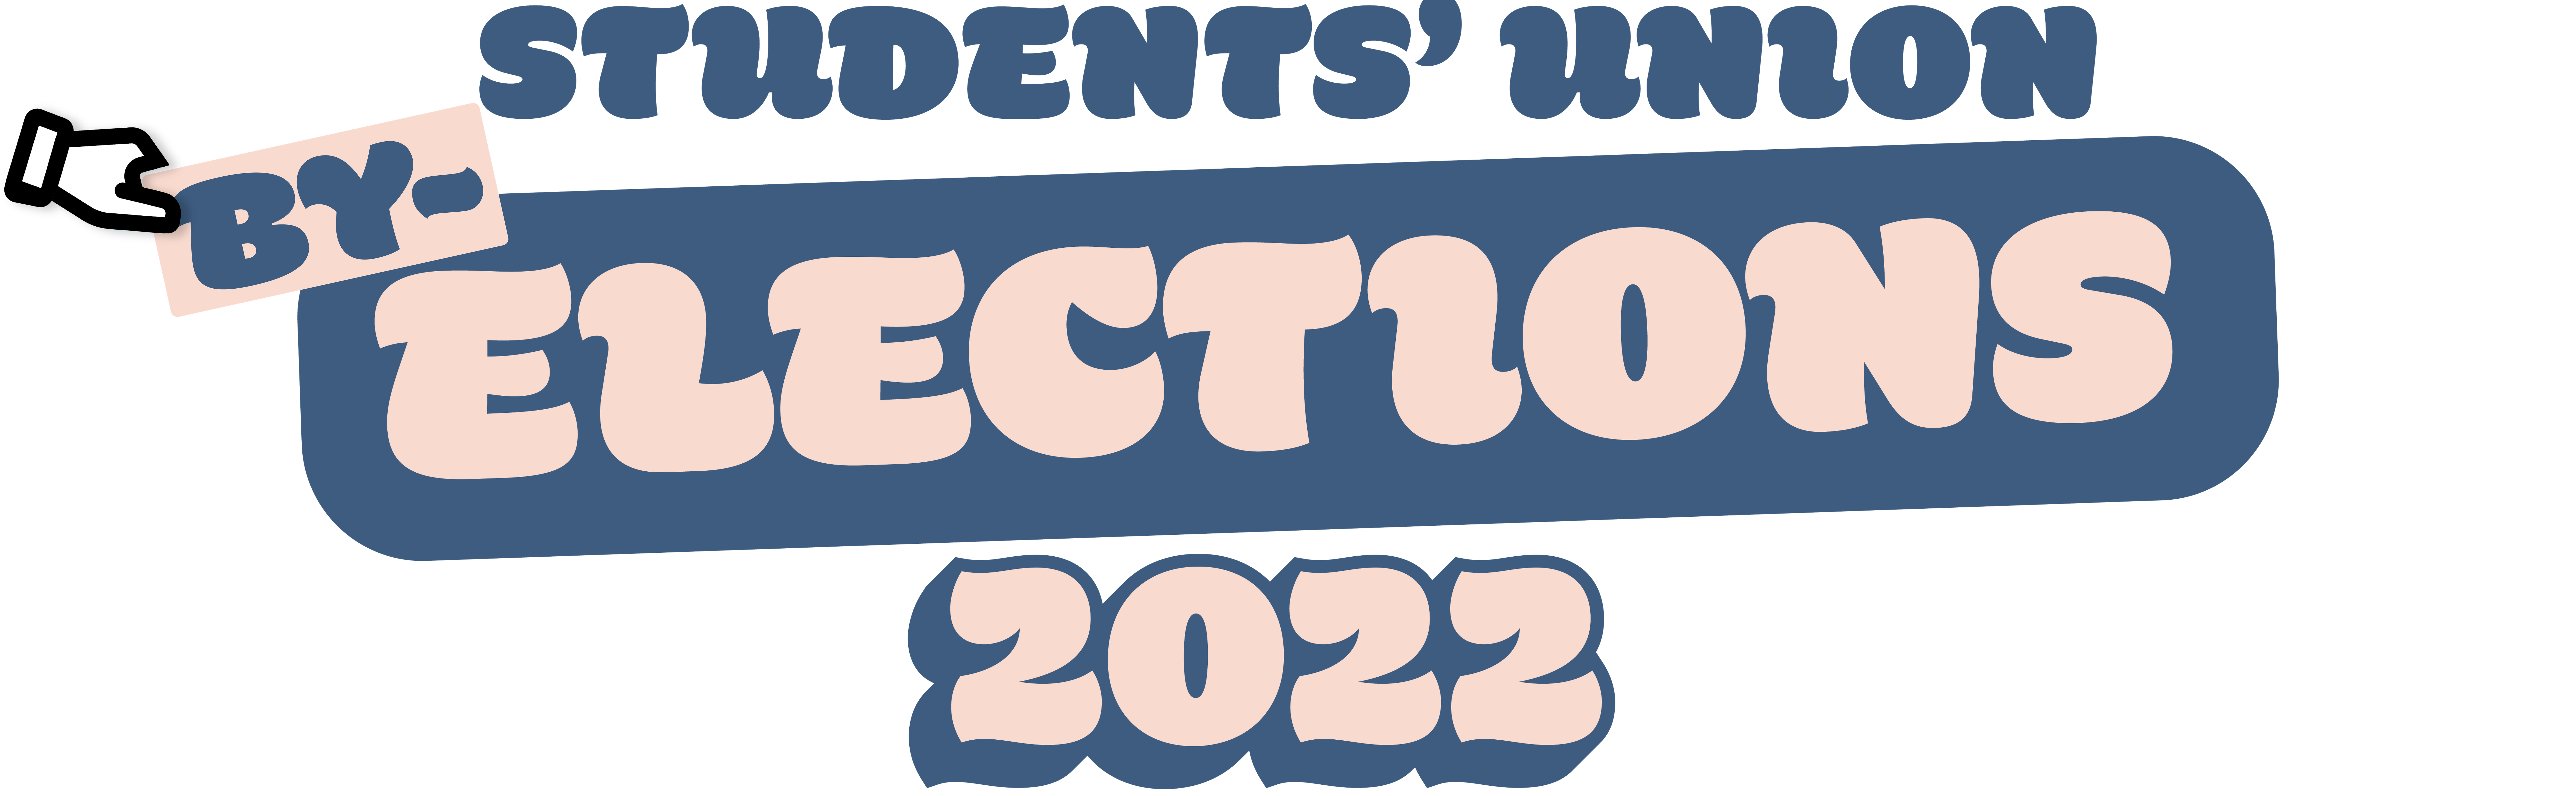 elections banner